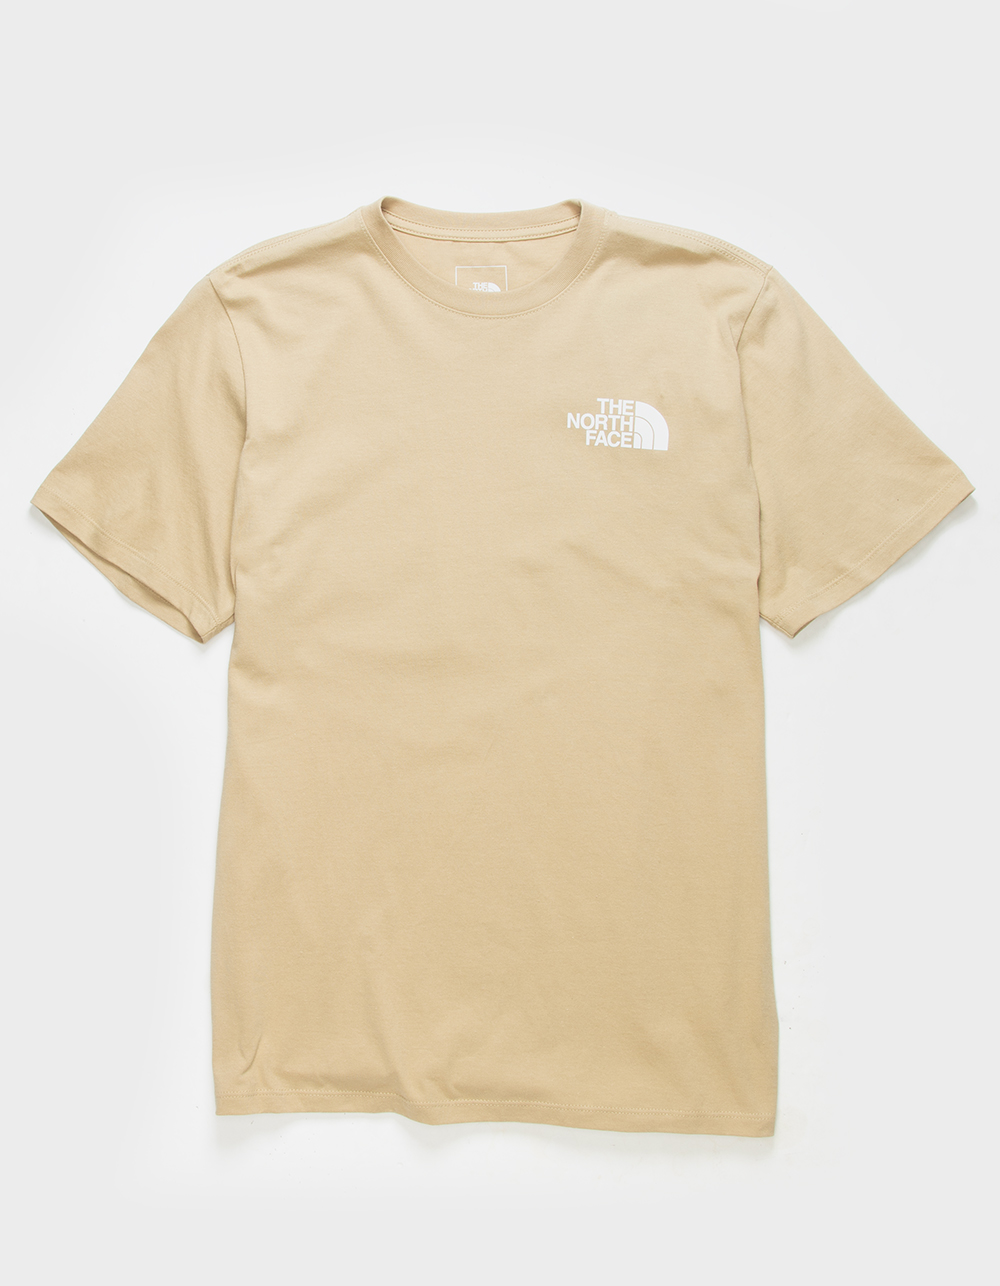 THE NORTH FACE Box NSE Mens Tee - SAND | Tillys